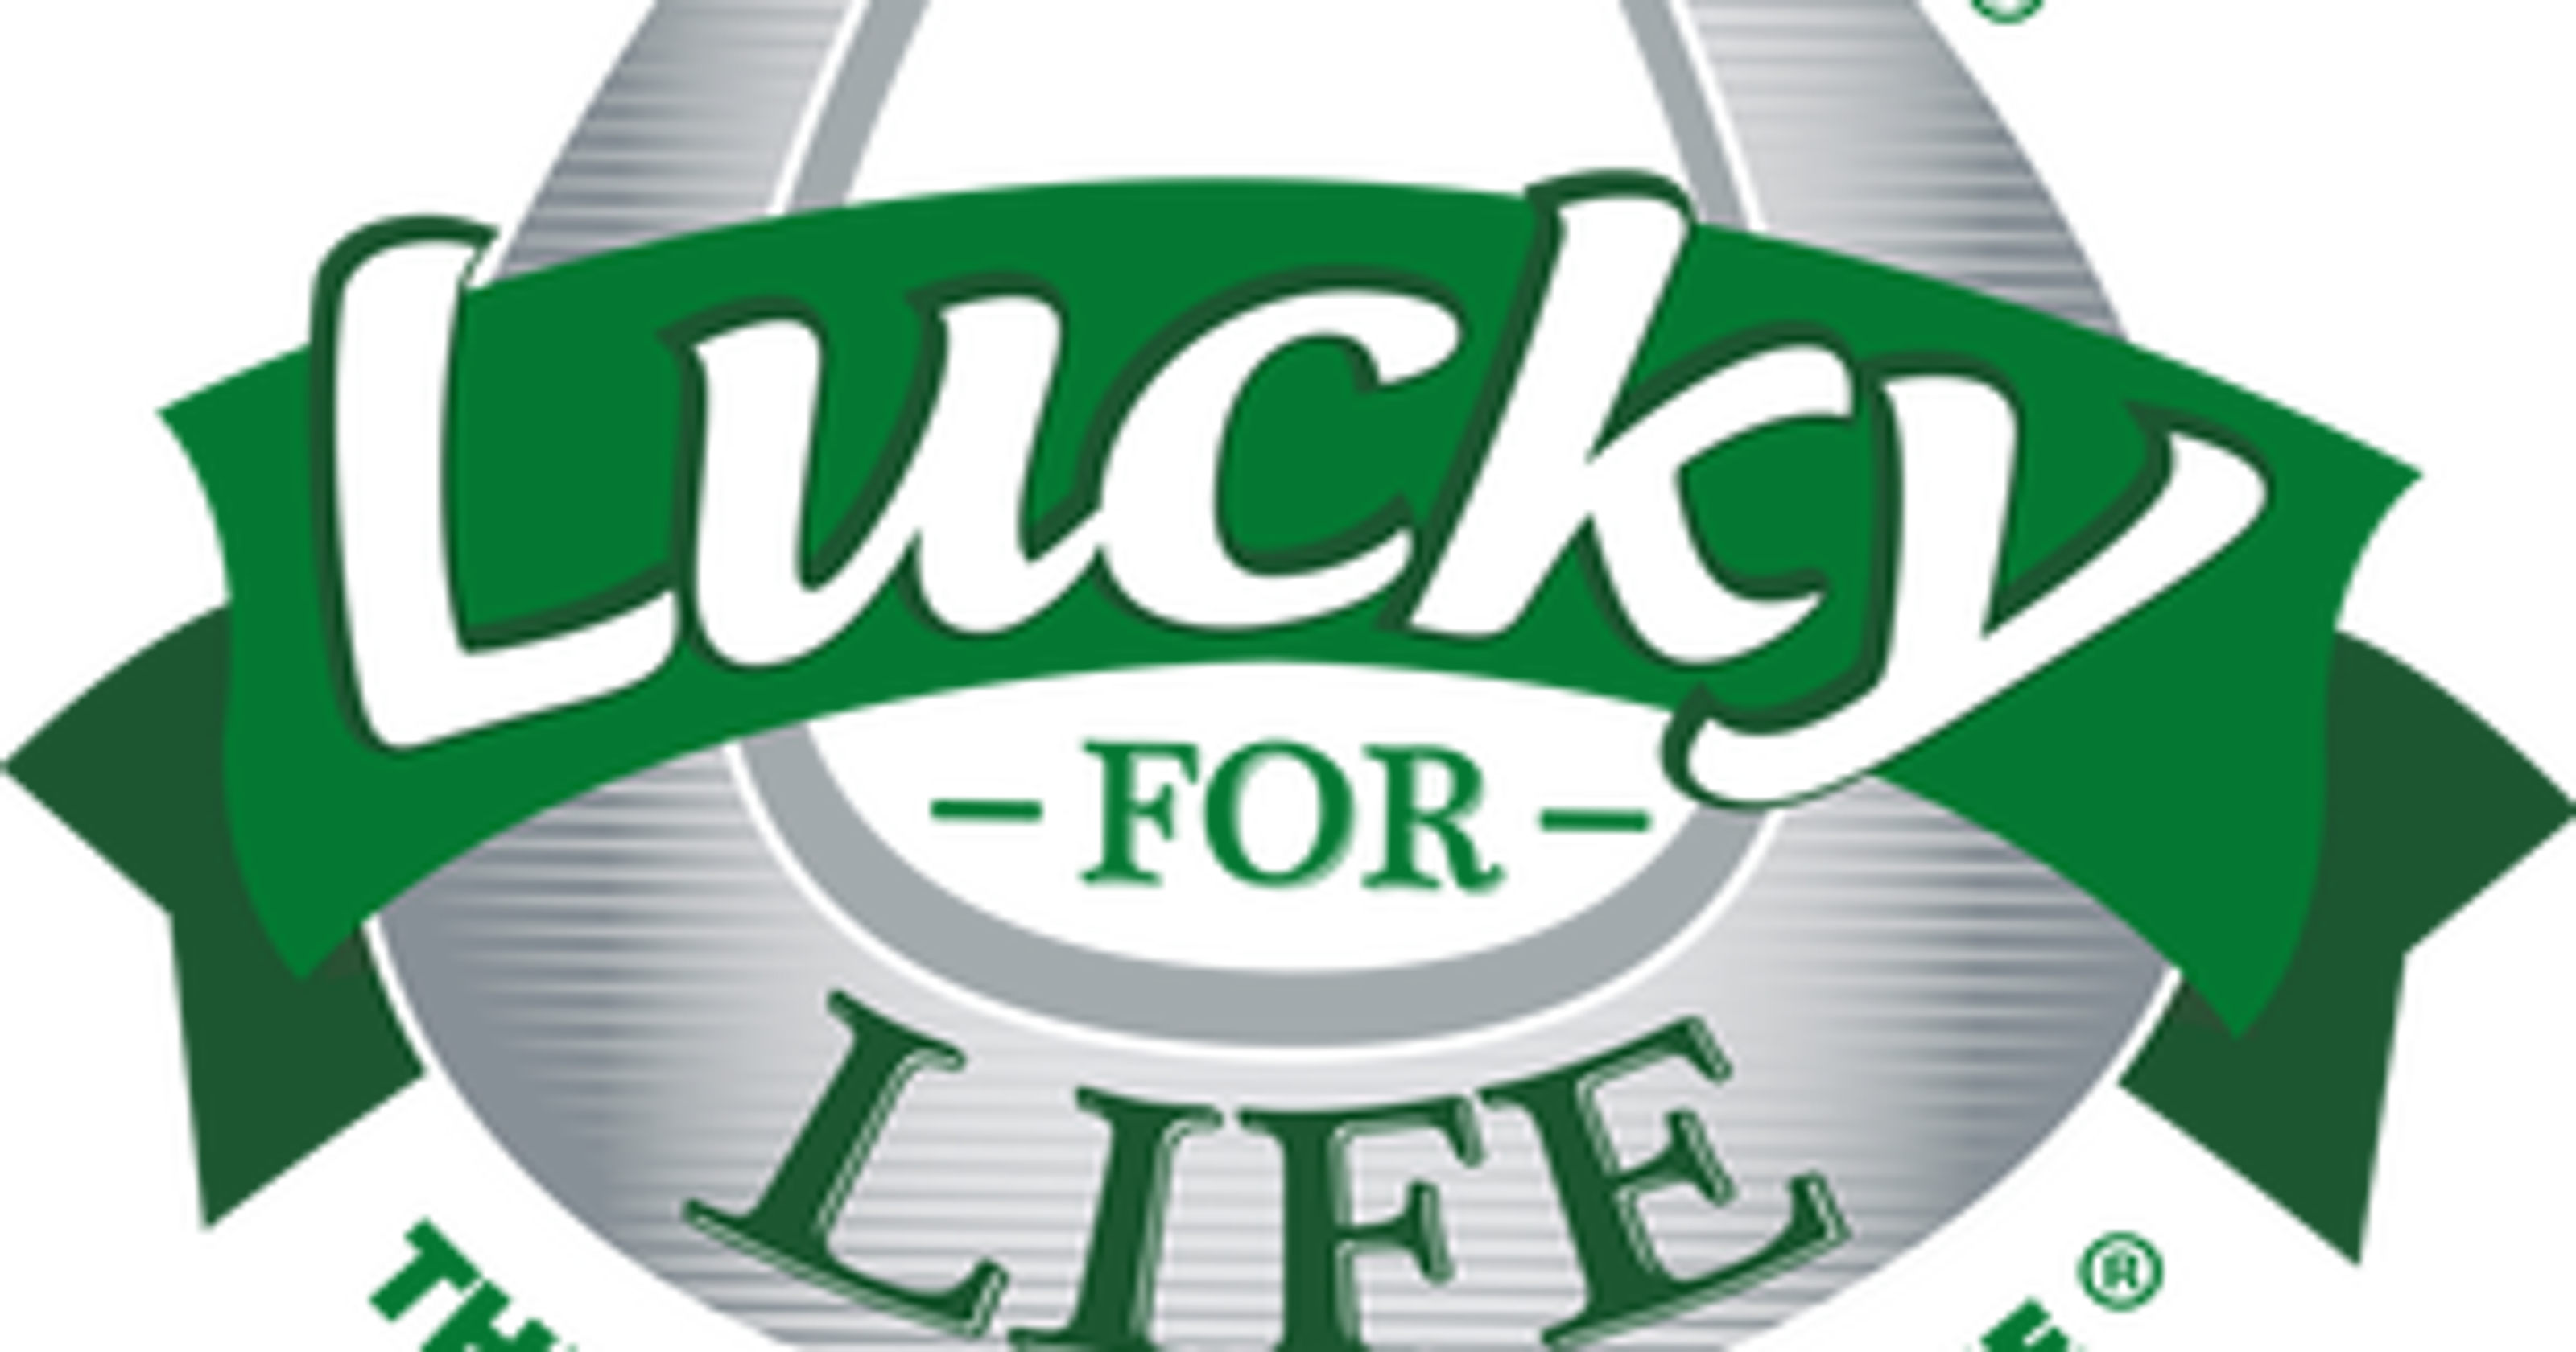 Michigan Lottery: Winning Lucky for Life ticket unclaimed3200 x 1680